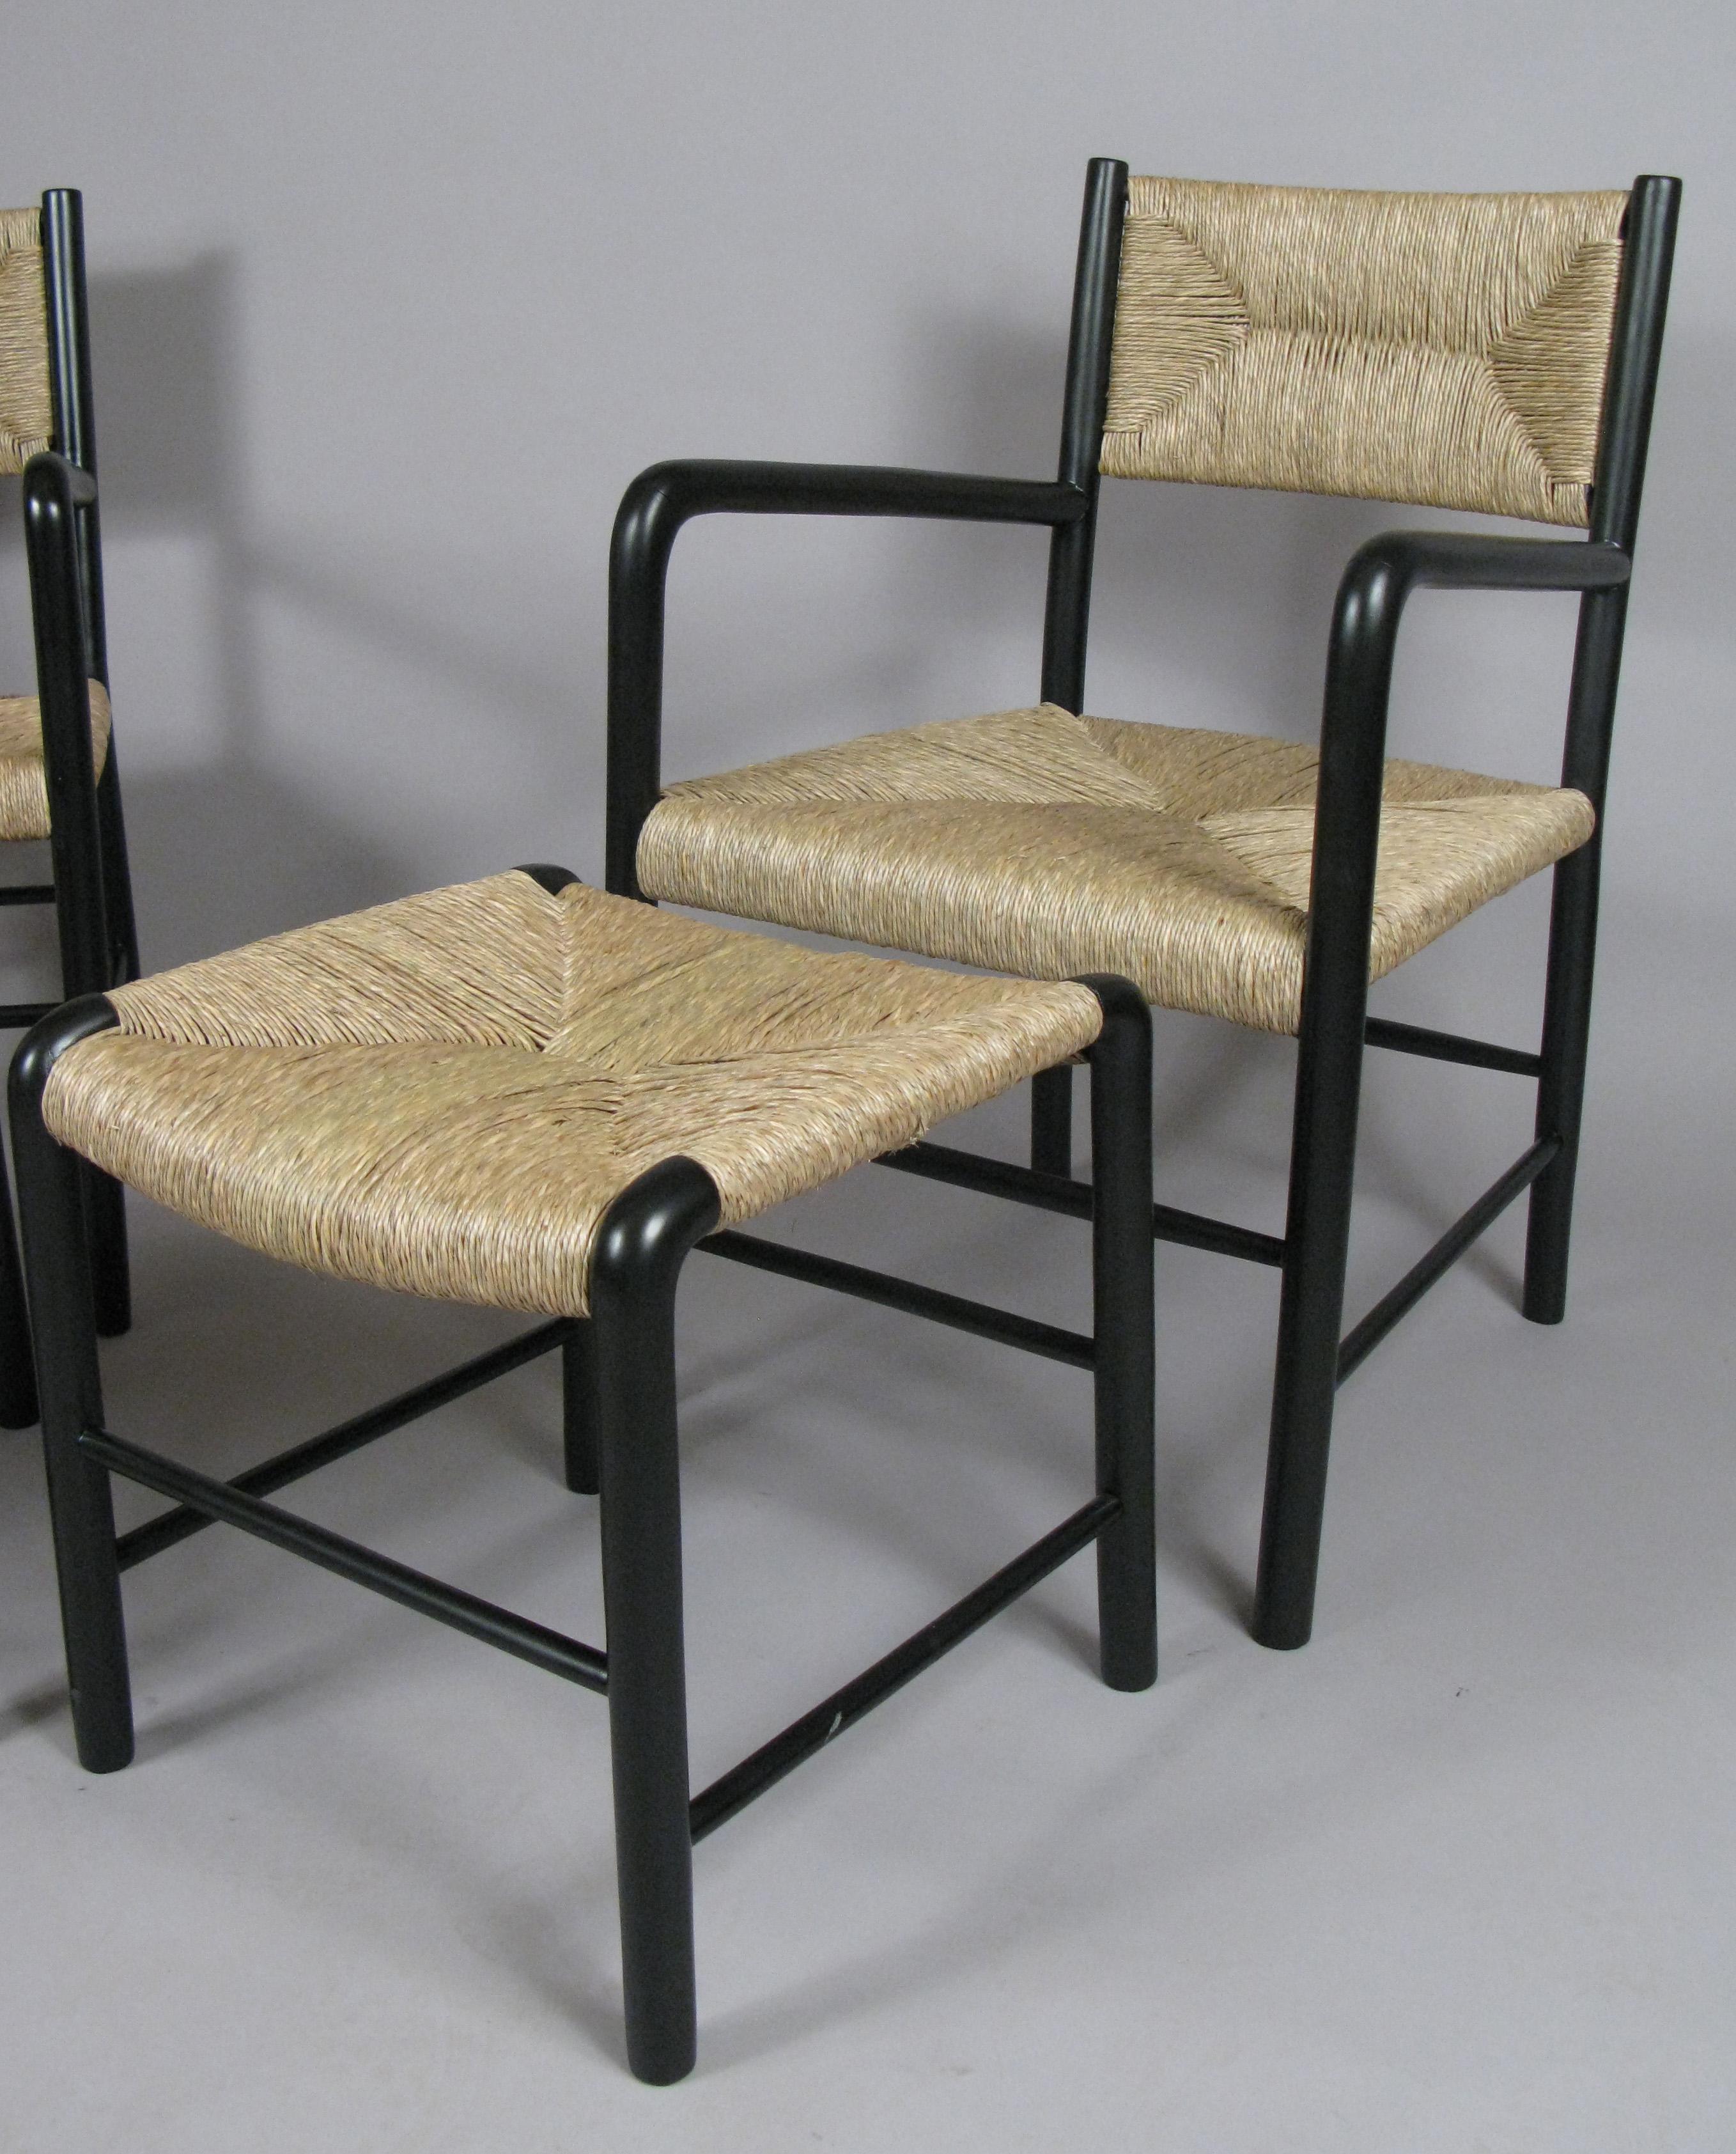 Mid-20th Century Pair of Italian 1930s Lacquered Birch Chairs and Ottomans